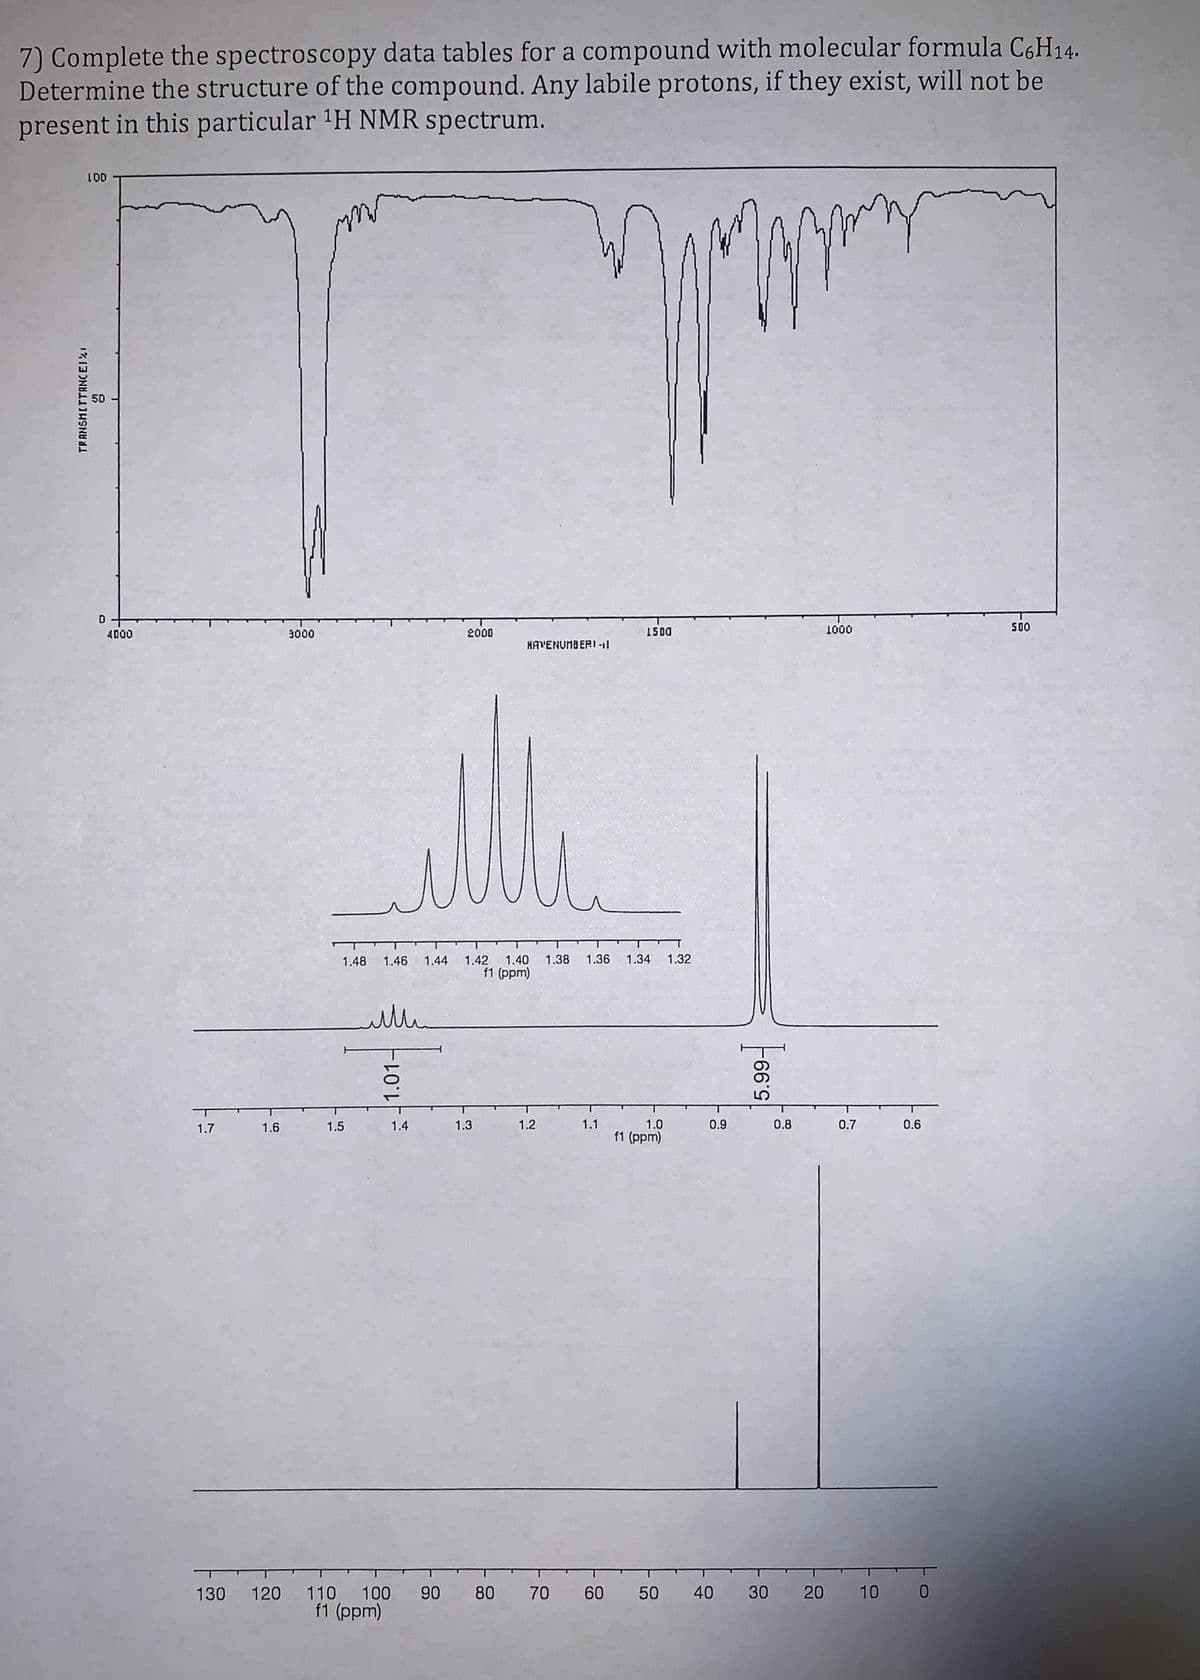 7) Complete the spectroscopy data tables for a compound with molecular formula C6H14.
Determine the structure of the compound. Any labile protons, if they exist, will not be
present in this particular 'H NMR spectrum.
50
4000
3000
2000
15D0
1000
500
HAVENUMB ER l-
1.38
1.36 1.34
1.32
1.42
1.40
f1 (ppm)
1.48
1.46
1.44
1.7
1.6 1.5
1.3
1.2
1.1
1.0
0.9
0.8
0.7
0.6
f1 (ppm)
130 120 110 100
f1 (ppm)
90
80
70
60 50
40
30
20
10
TRANSMITTANCEII
*1.01-
-66'의
